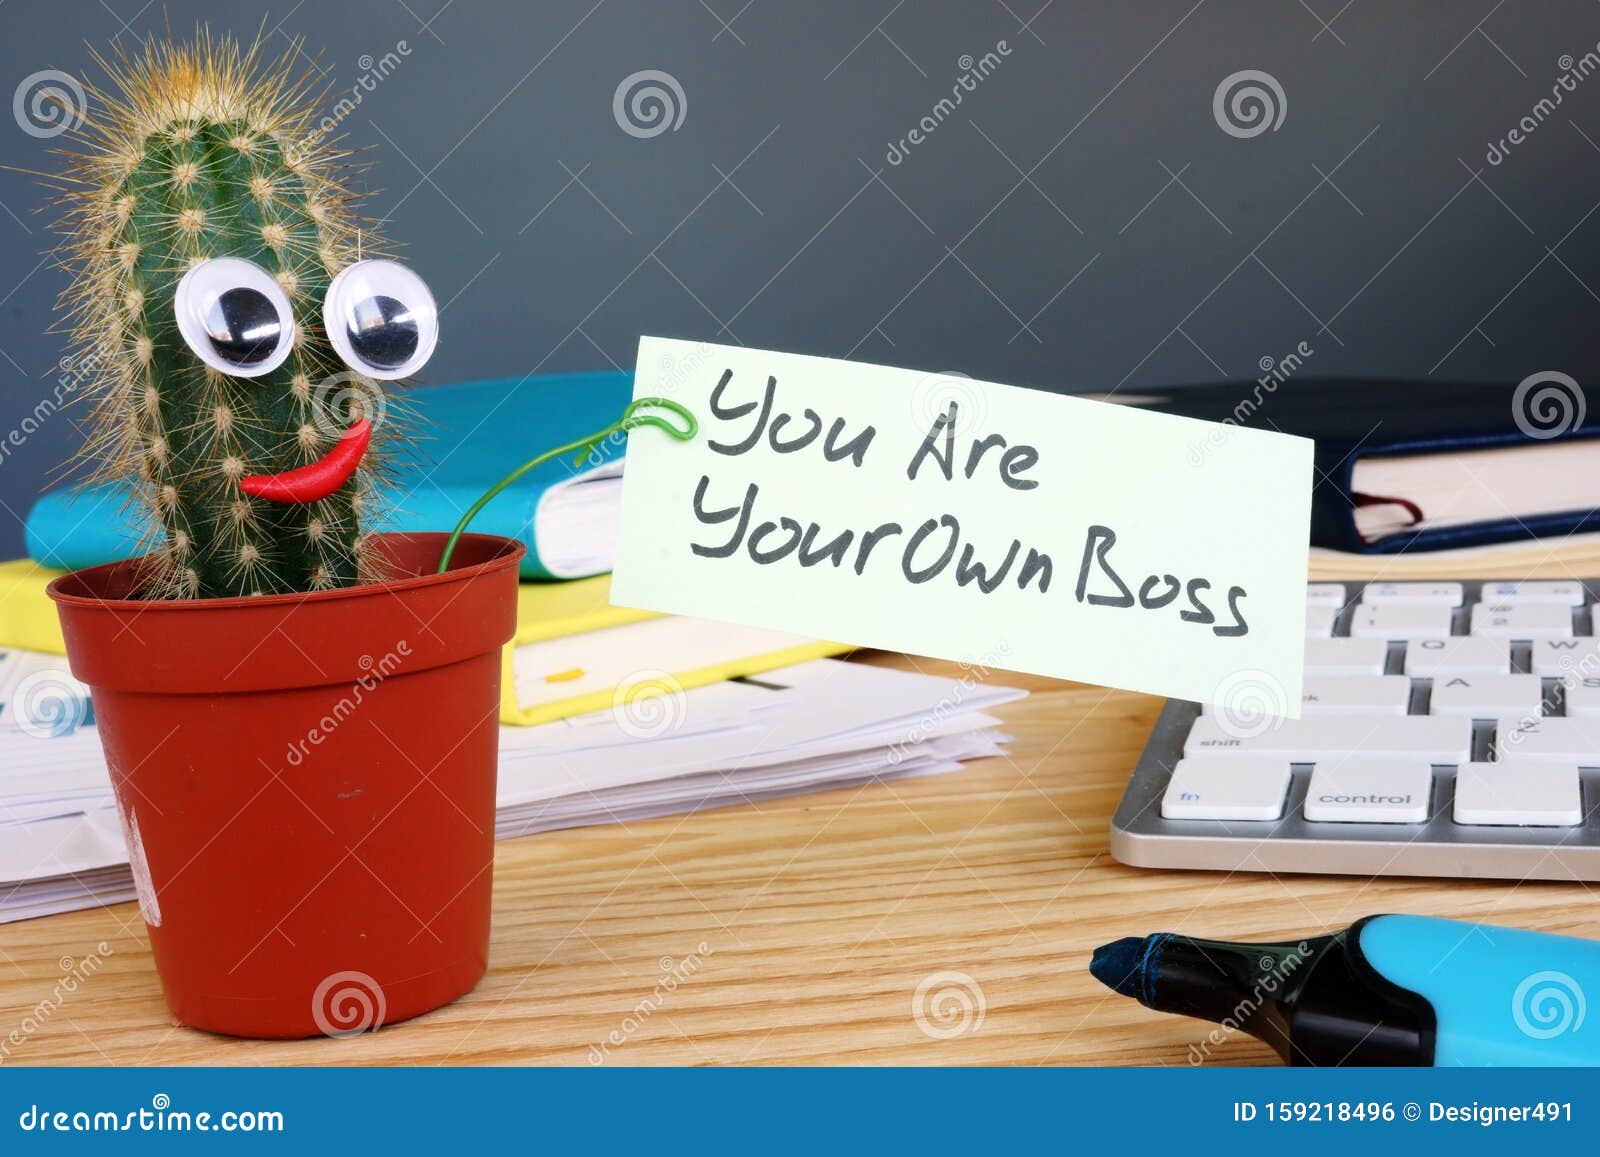 you are your own boss sign on the desk